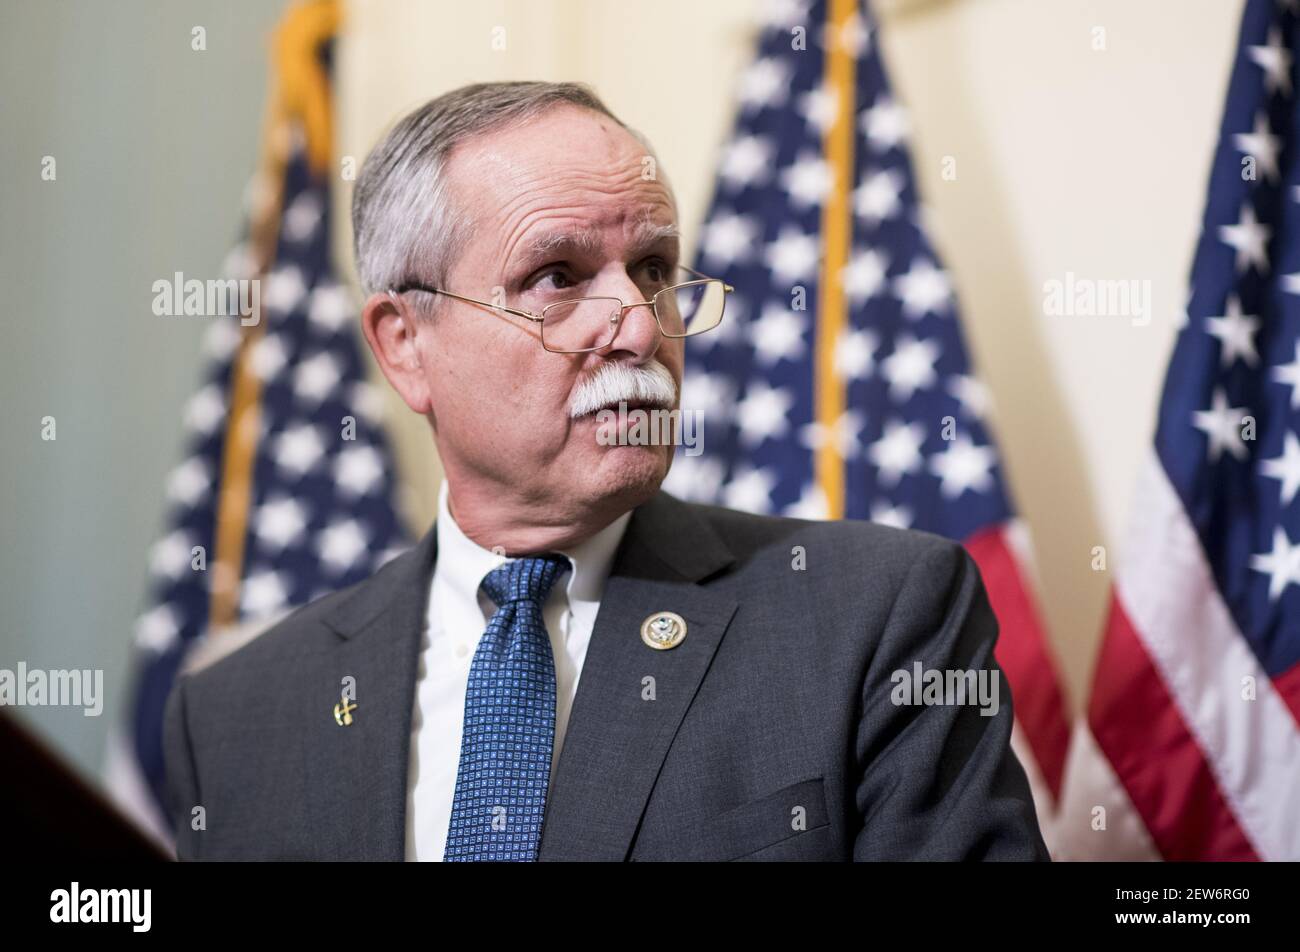 UNITED STATES - OCTOBER 3: Rep. David McKinley, R-W.Va., speaks during the press conference on the introduction of the American Miners Pension Act (AMP Act) in the Capitol on Tuesday, Oct. 3, 2017. (Photo By Bill Clark/CQ Roll Call) Stock Photo